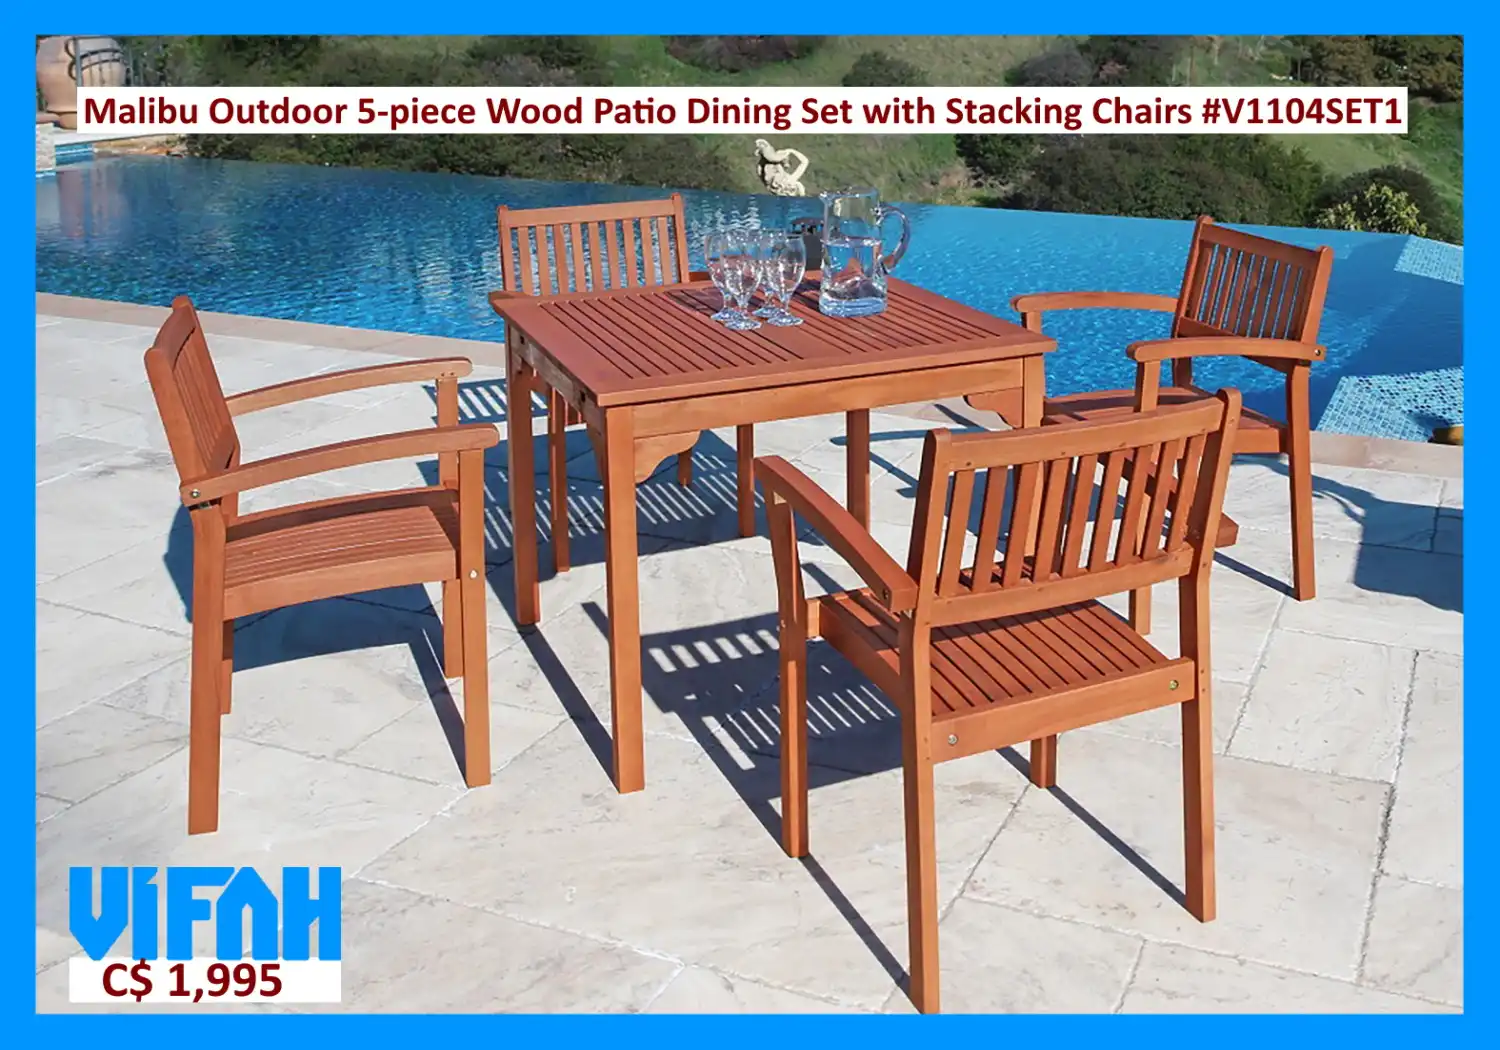 MALIBU Outdoor #V1104SET01 5-piece Wood Patio Dining Set with Stacking Chairs